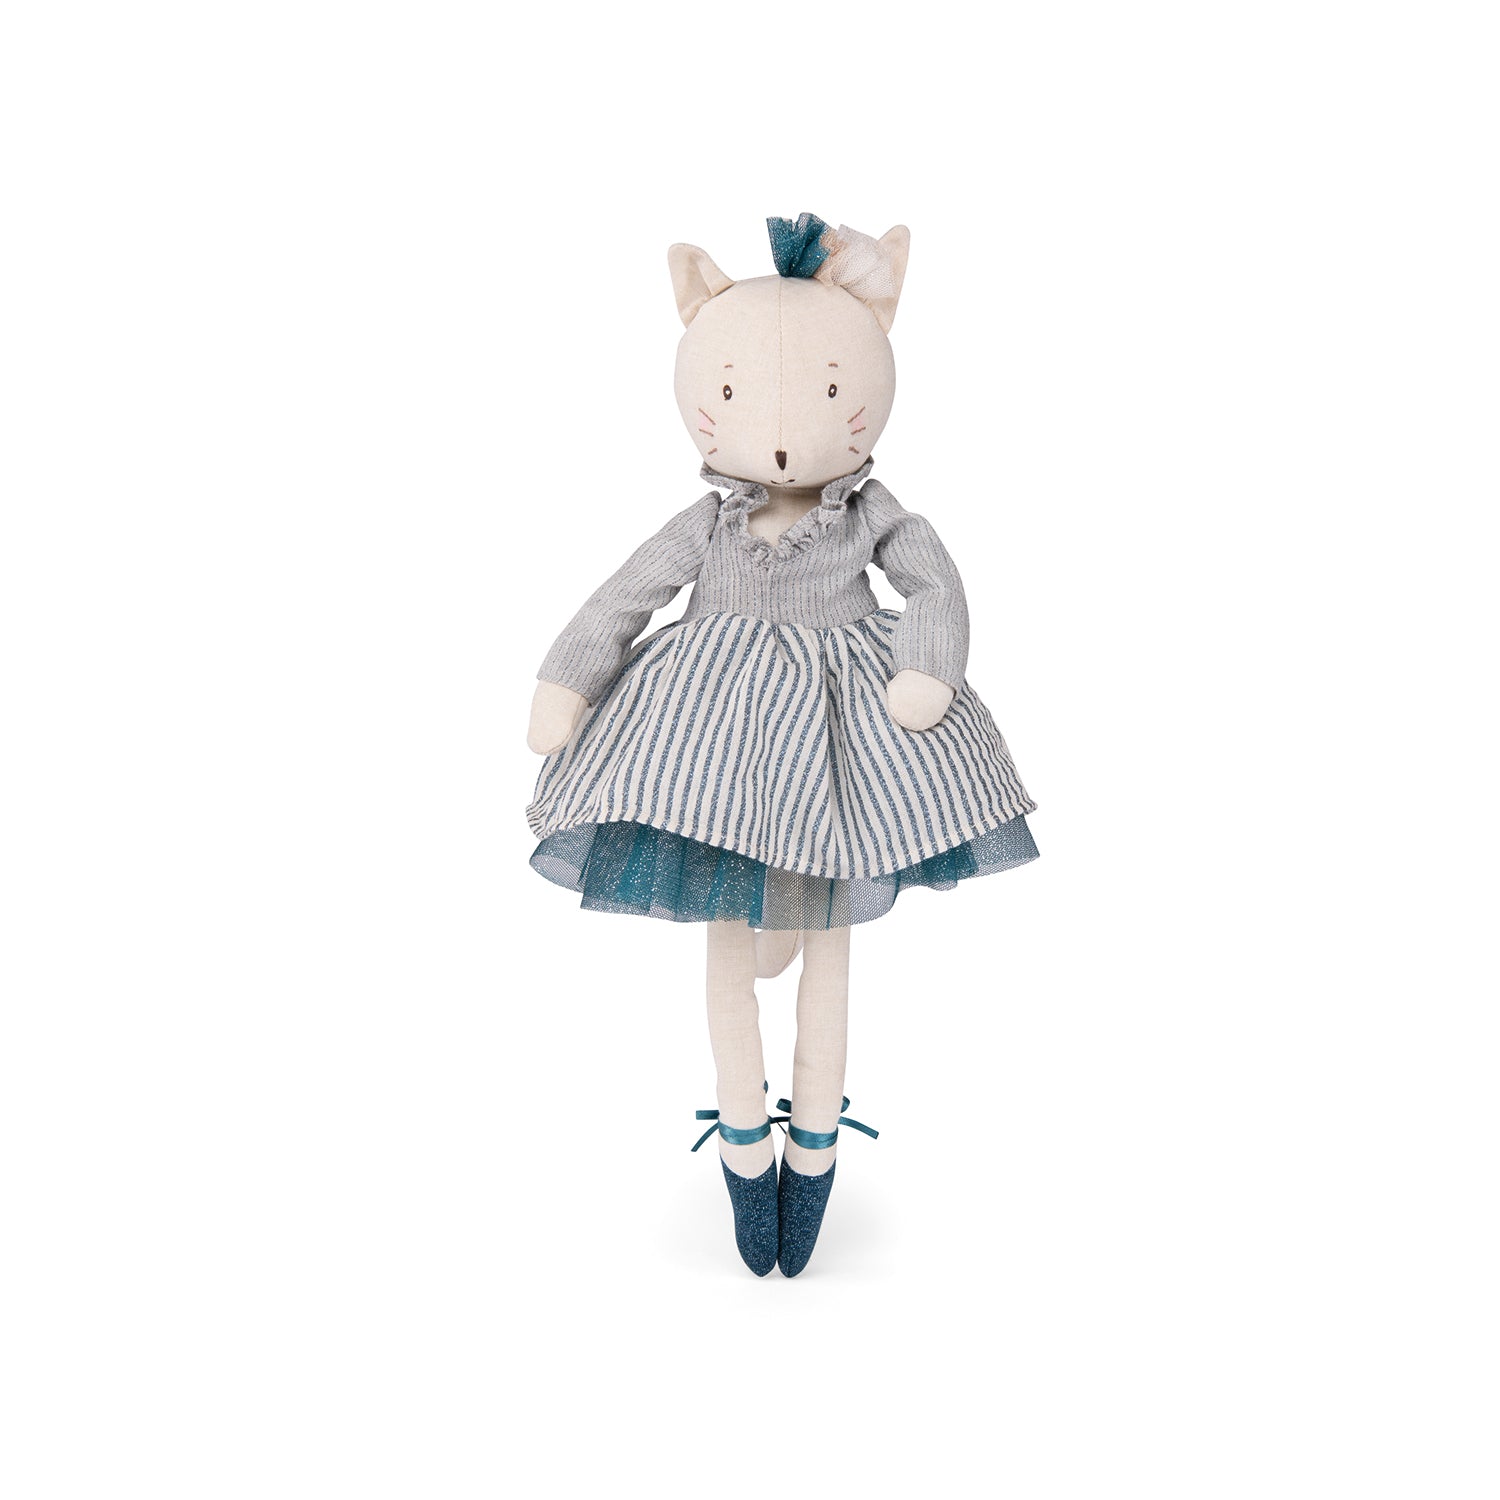 <h5>Description</h5>
<p>In this new collection, Celestine, a chambray plain-weave fabric cat doll with a lovely embroidered face, is dressed in a dancer&#39;s favorite outfit.<br>A tutu, a tulle bow in her hair, ballet points with ribbons...<br>Easy for little hands to grab, she is sure to become a favorite play companion for budding ballerinas.  </p>
<h5>Specifications</h5>
<p> <strong>Color</strong>: Multicolored<br><strong>Recommended Age</strong>: 0+<br><strong>Material</strong>: cotton, Polyester, elastane, acrylic, linen<br><strong>Size (inches)</strong>: L: 6 x W: 2 x H: 2<br><strong>Weight (lbs)</strong>: 0,21<br><strong>Care instructions</strong>: Machine washable at 30°C on wool cycle.No tumble dry.</p>
